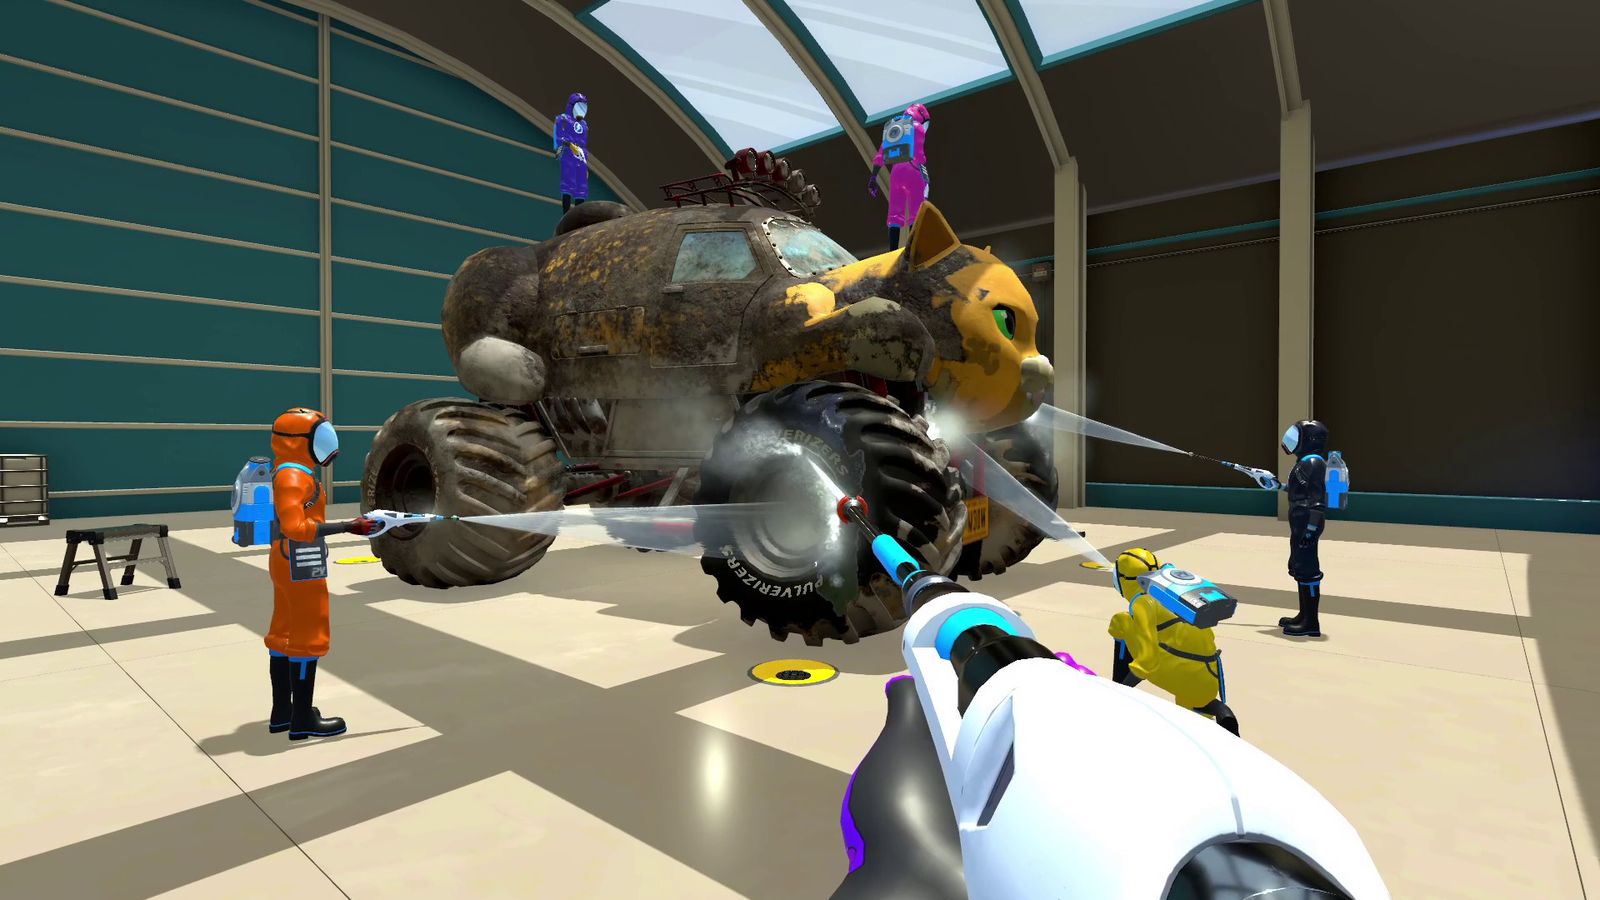 A PowerWash Simulator first-person shot, with the player character washing a monster truck.